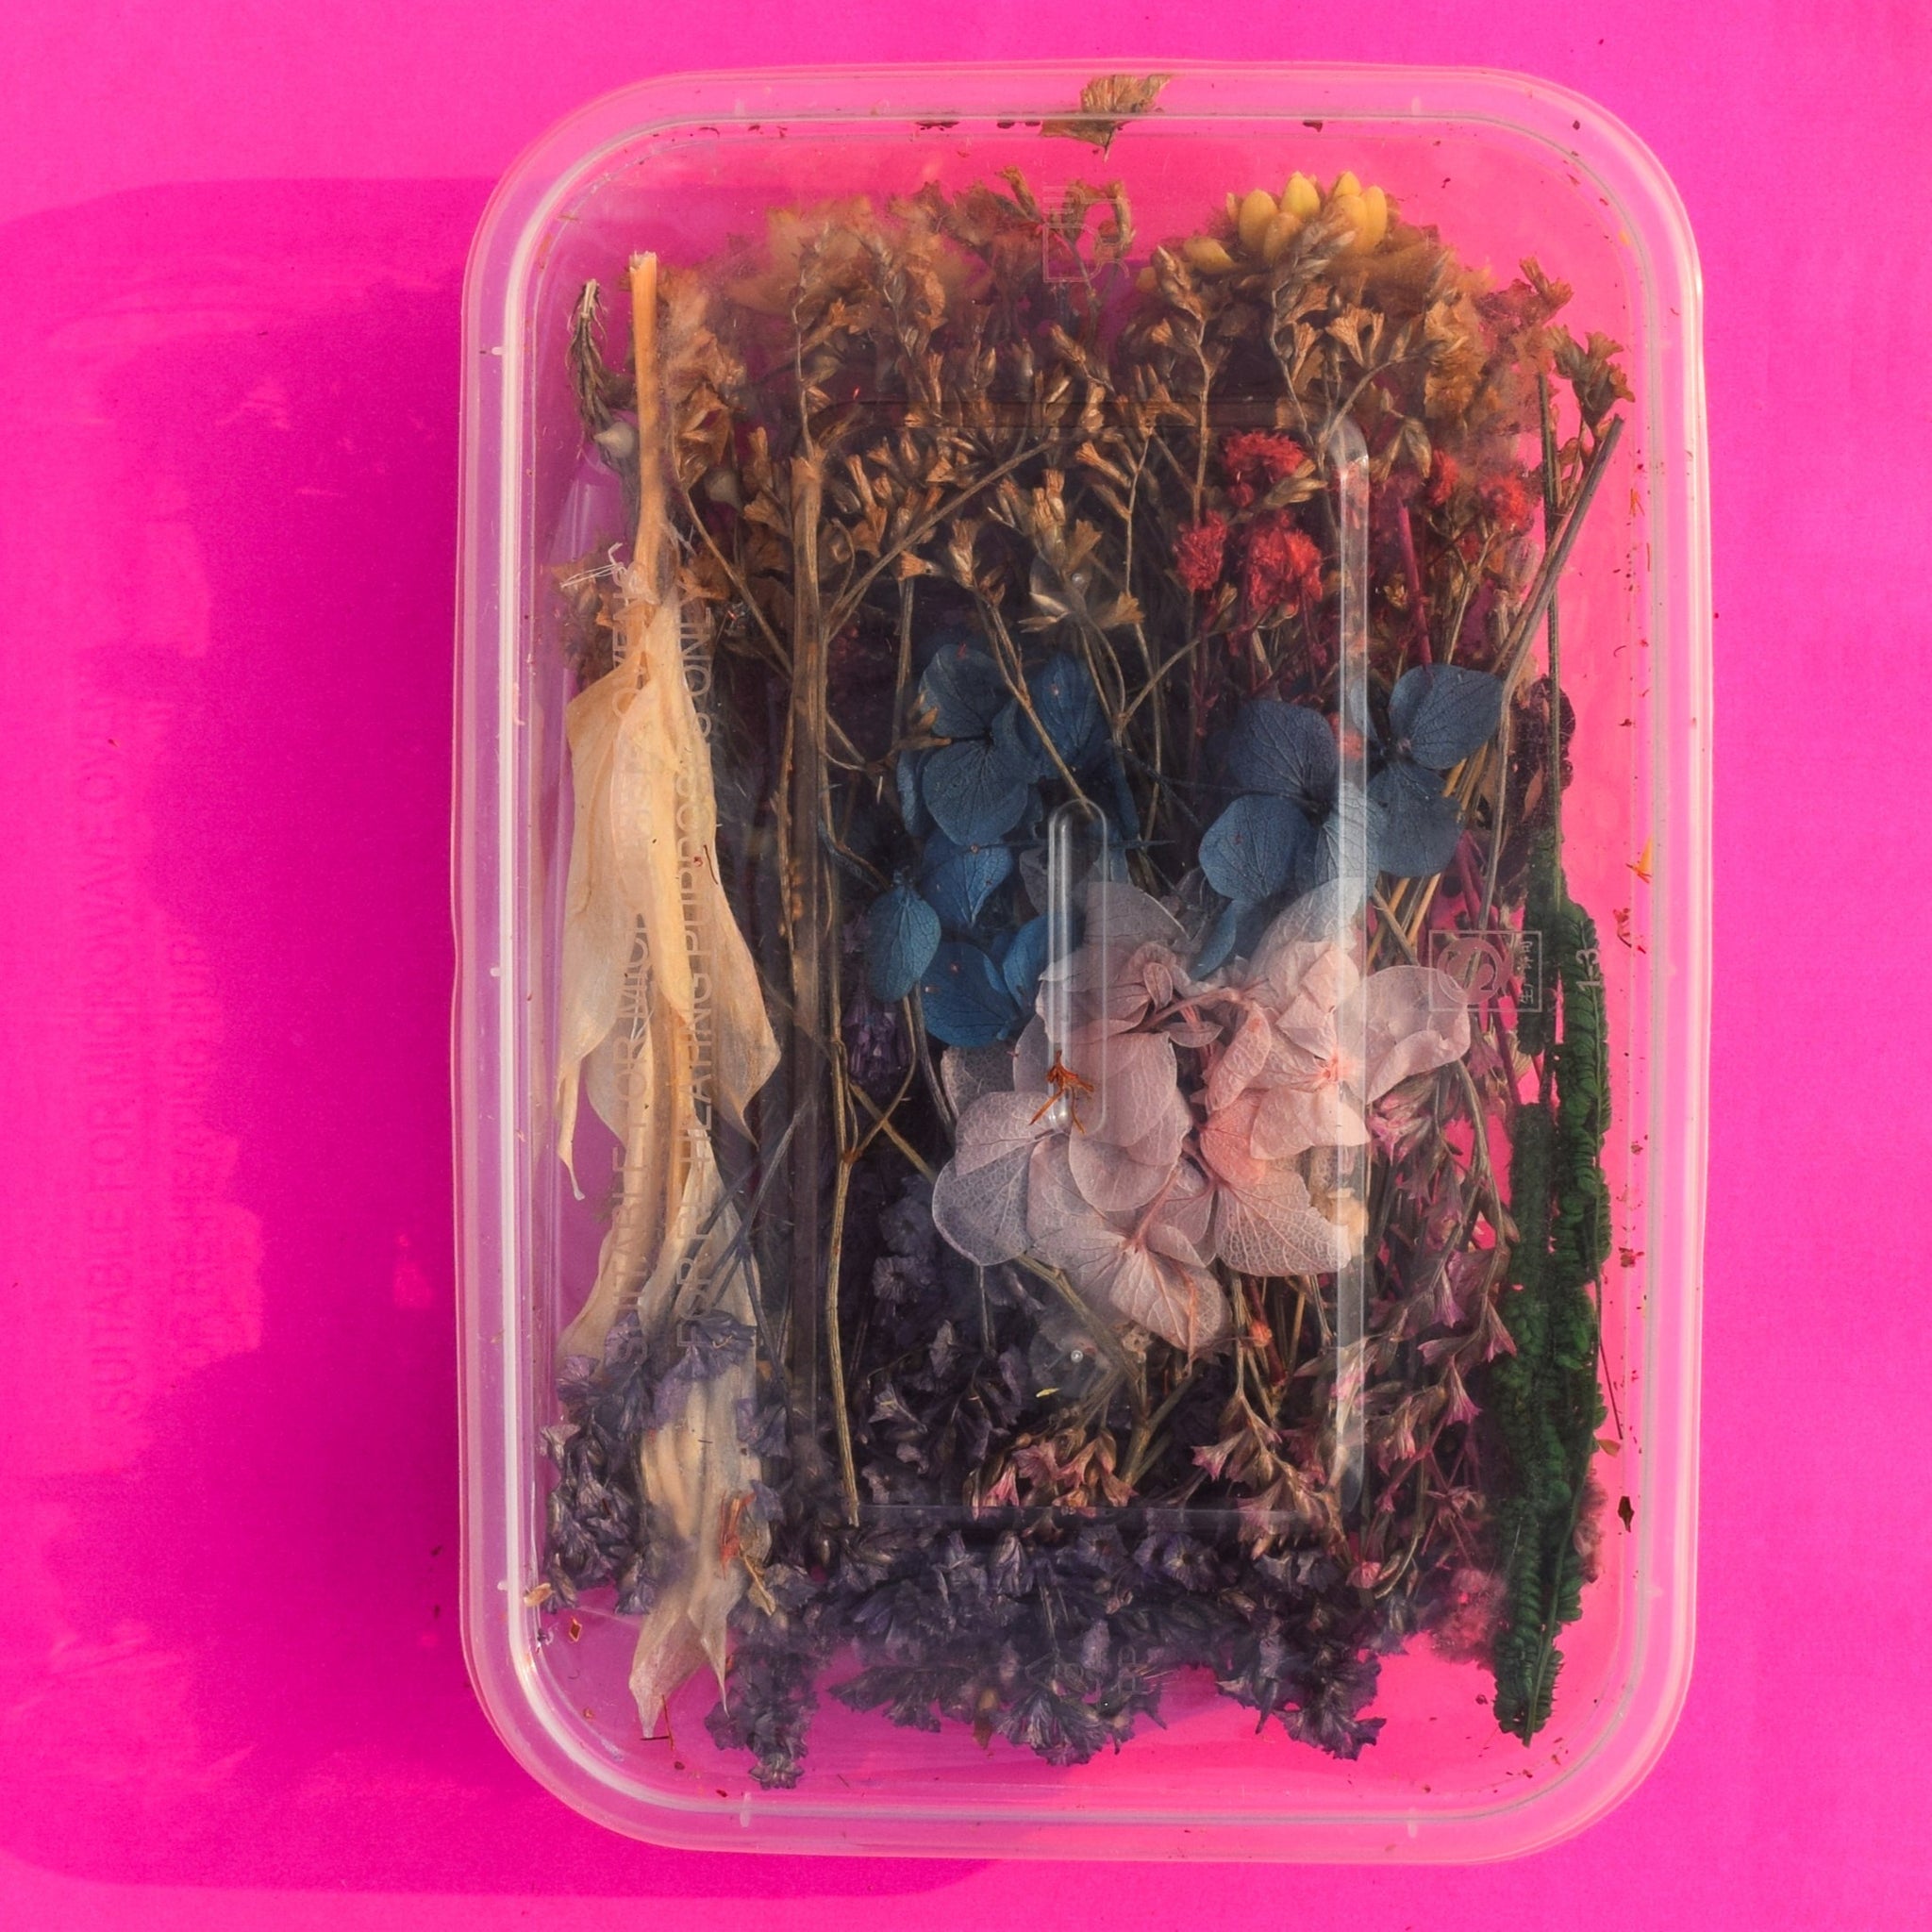 Dried flower - Light pink and blue with grass